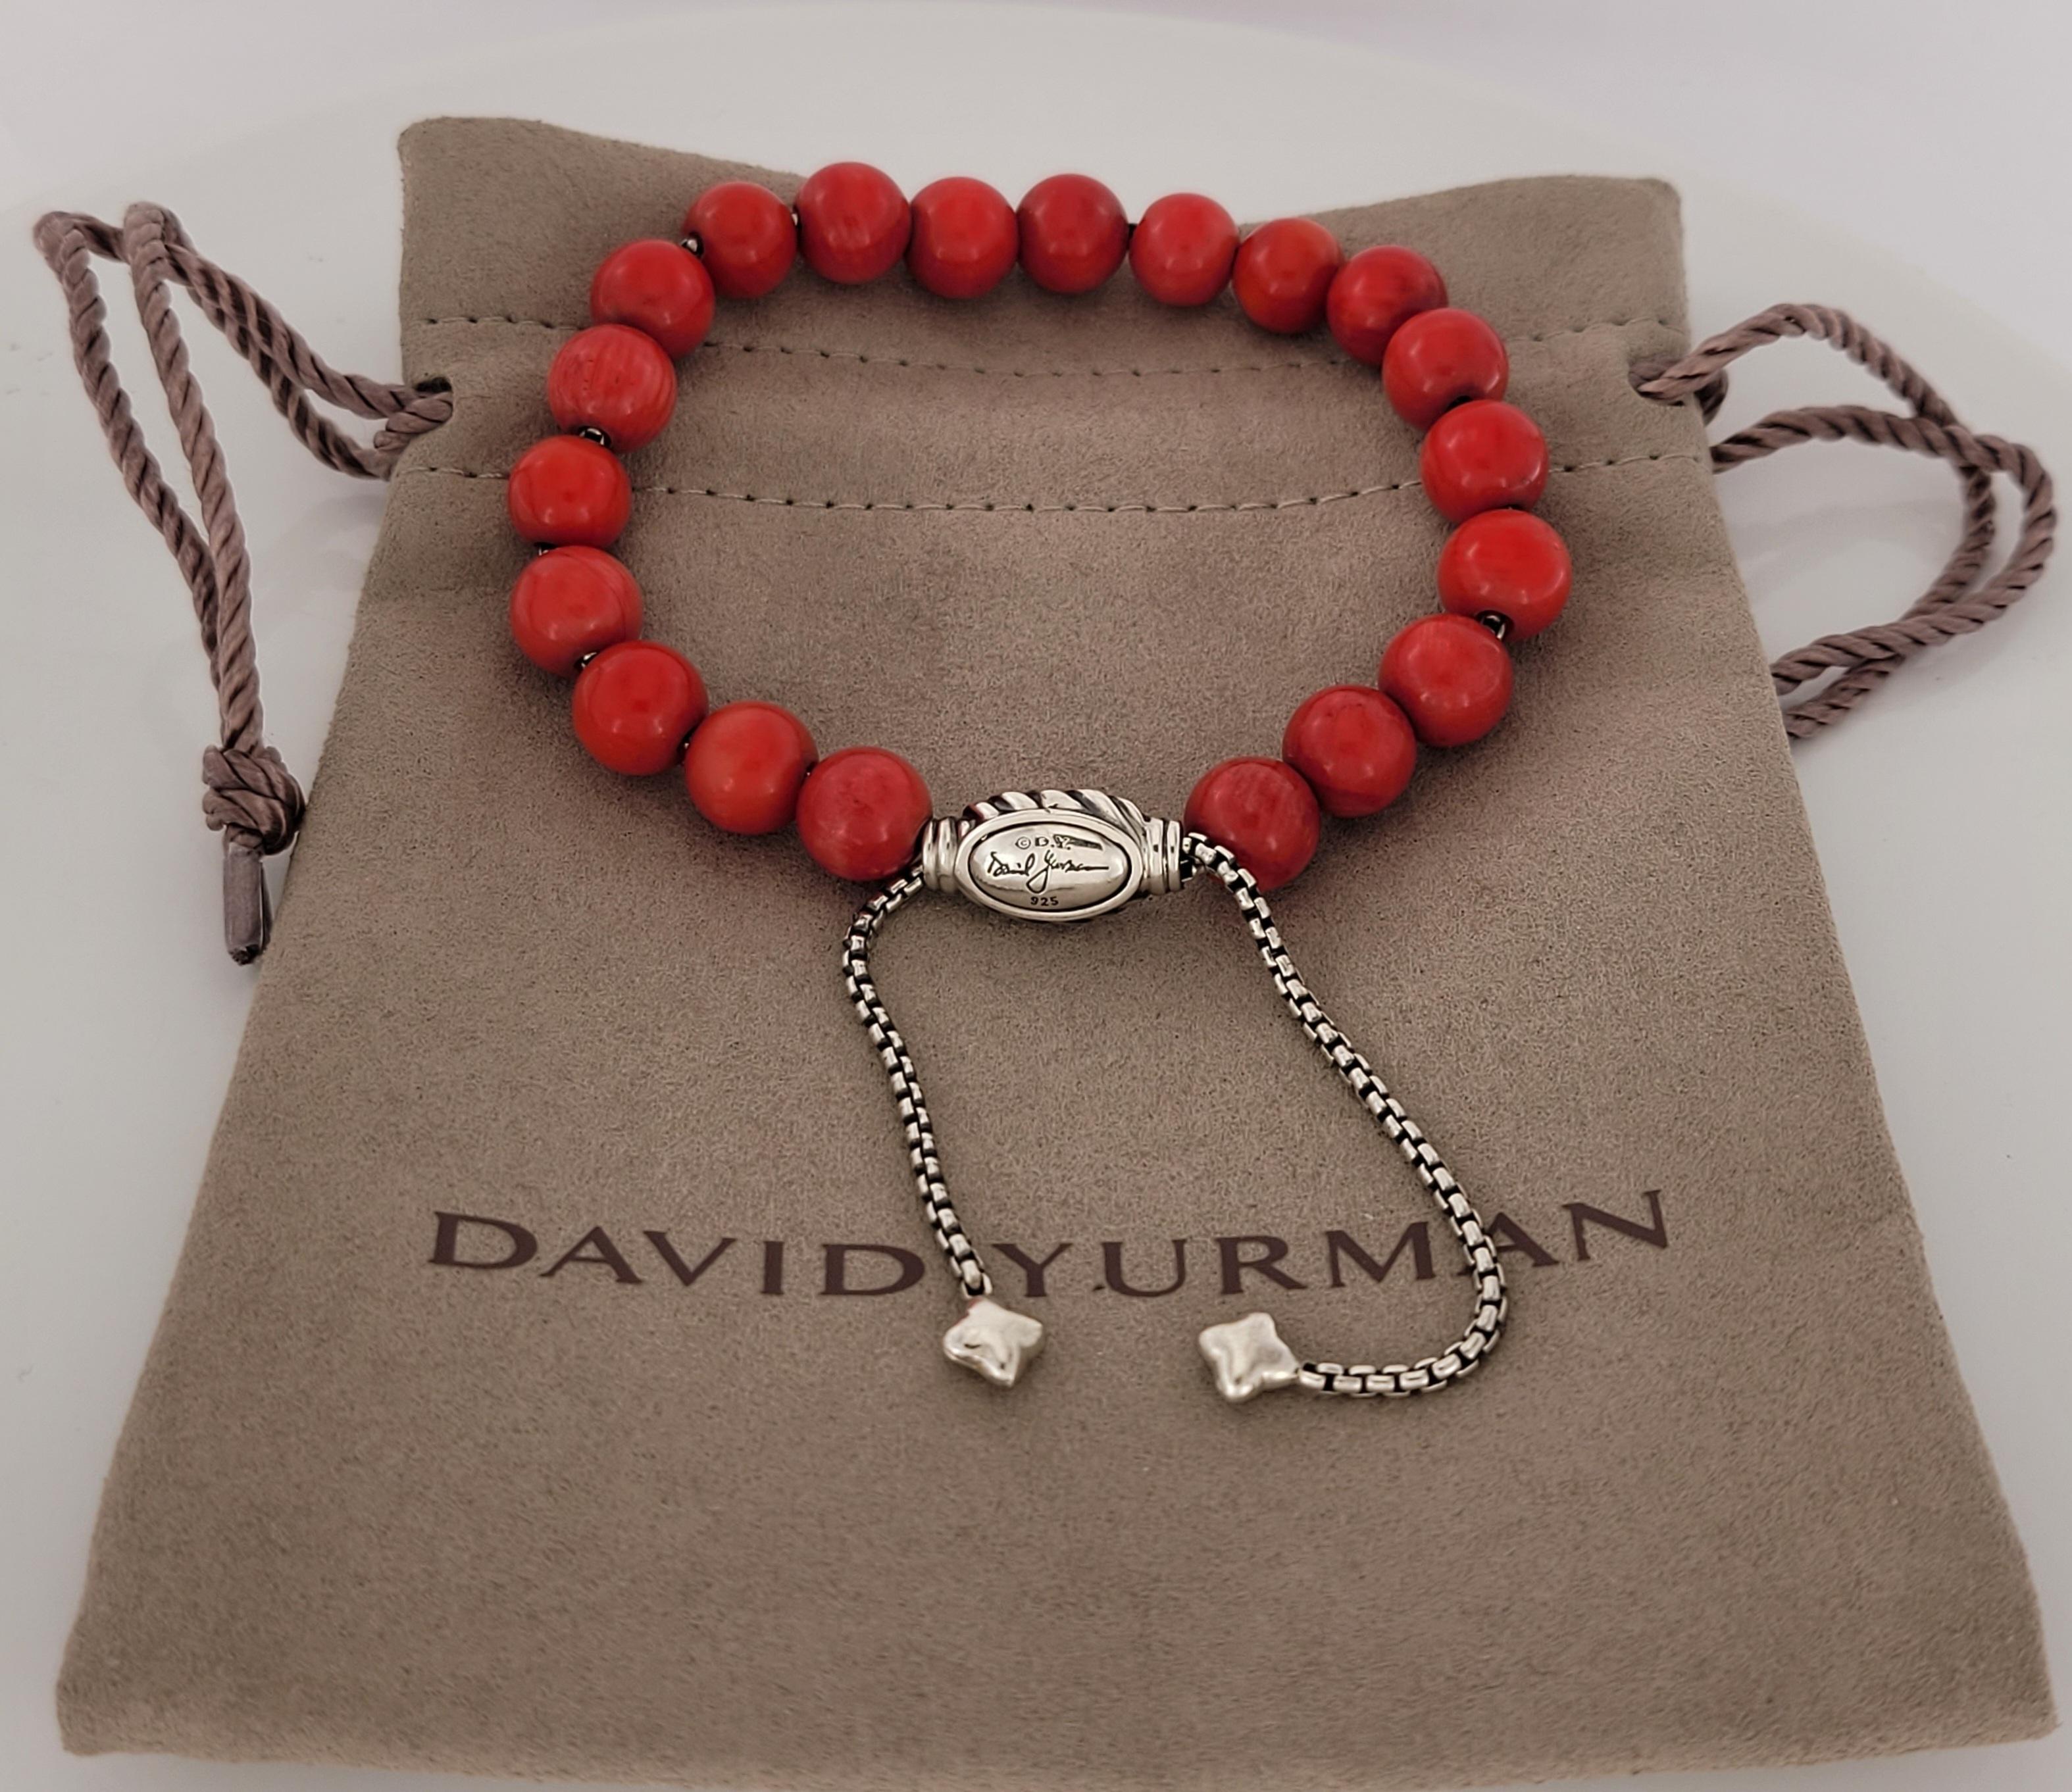 Brand David Yurman 
Sterling Silver 925
Red Coral bead bracelet
Material Sterling Silver 925
Onyx Width 8mm
Adjustable length 
Comes with David Yurman pouch
Condition Never worn
Retail Price: $450    